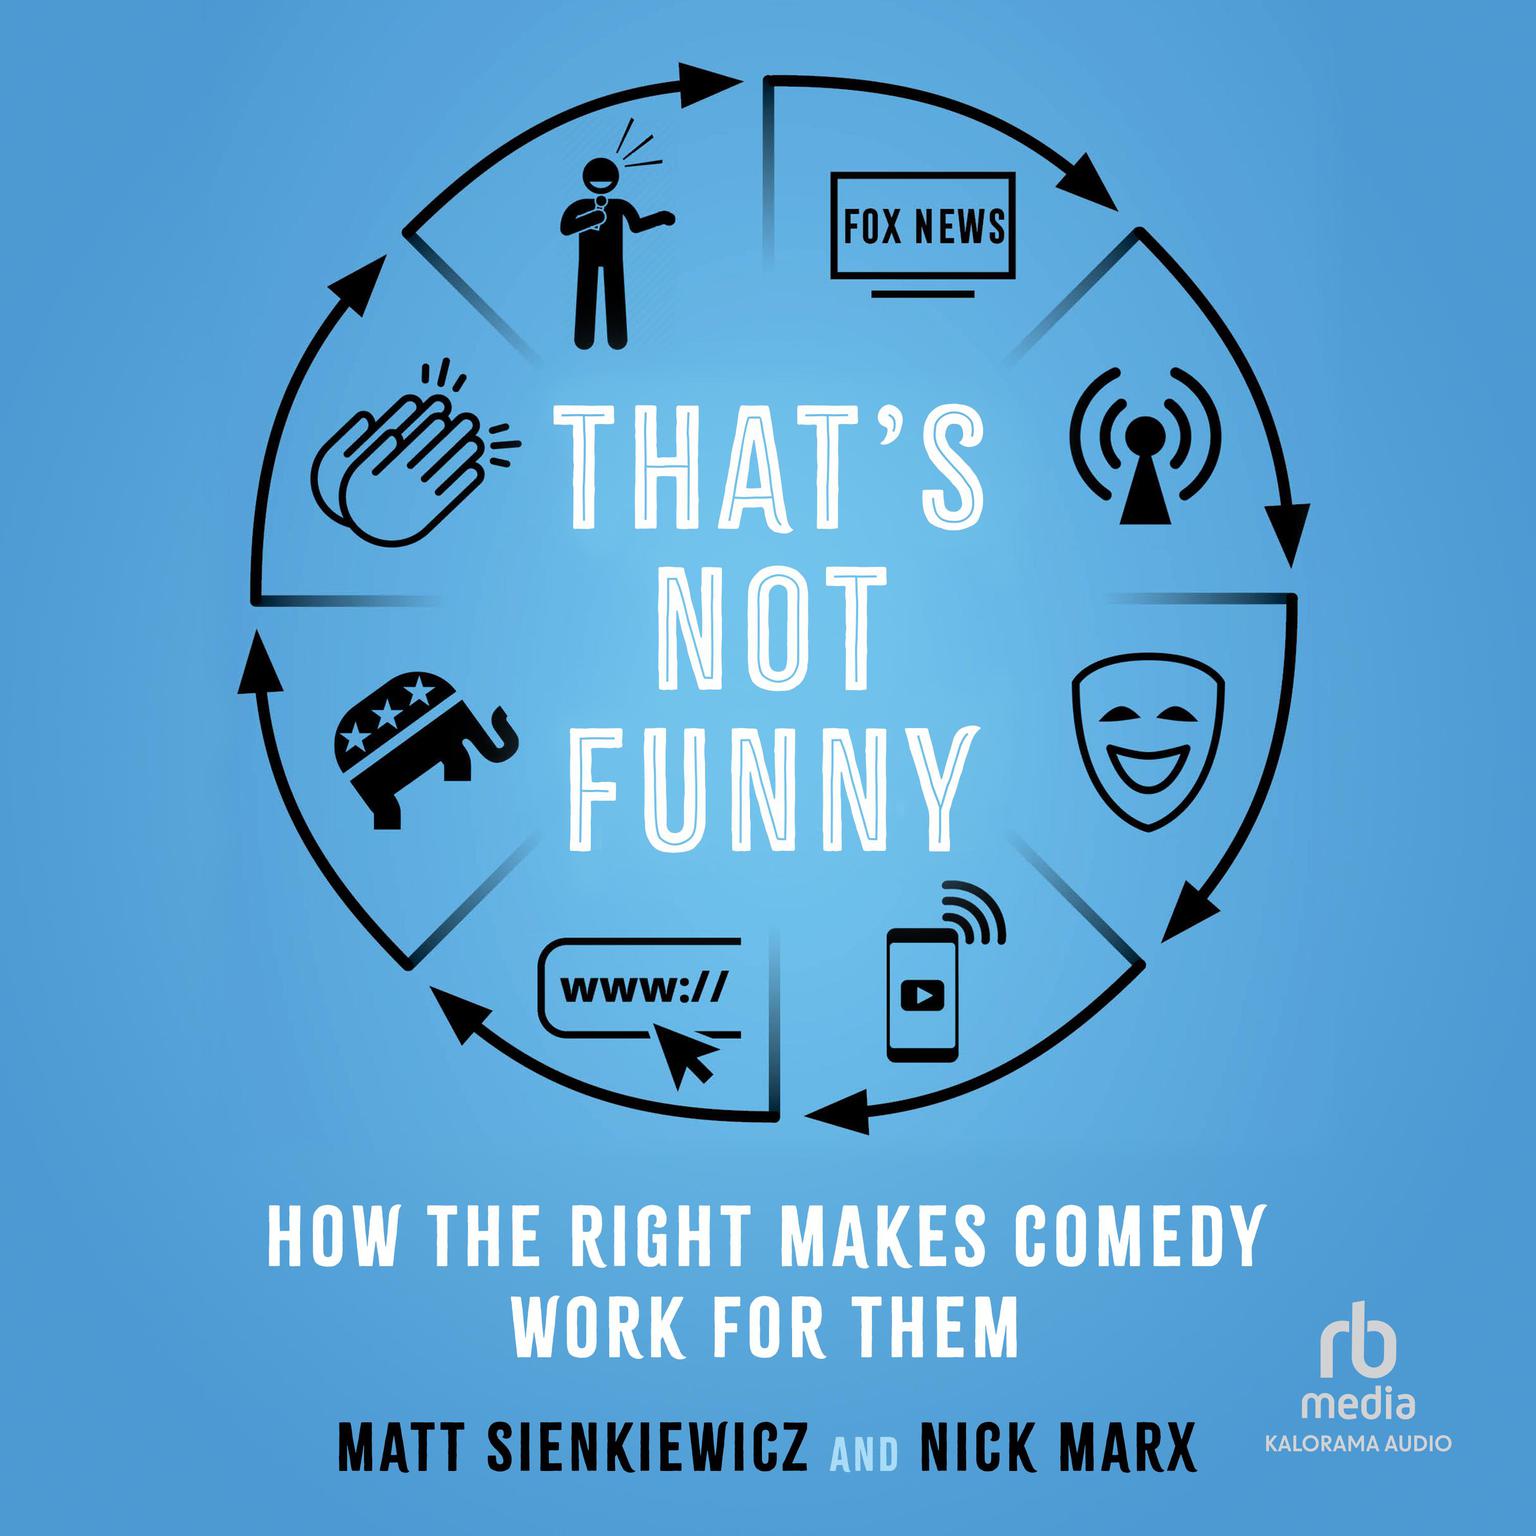 Thats Not Funny: How the Right Makes Comedy Work for Them Audiobook, by Matt Sienkiewicz